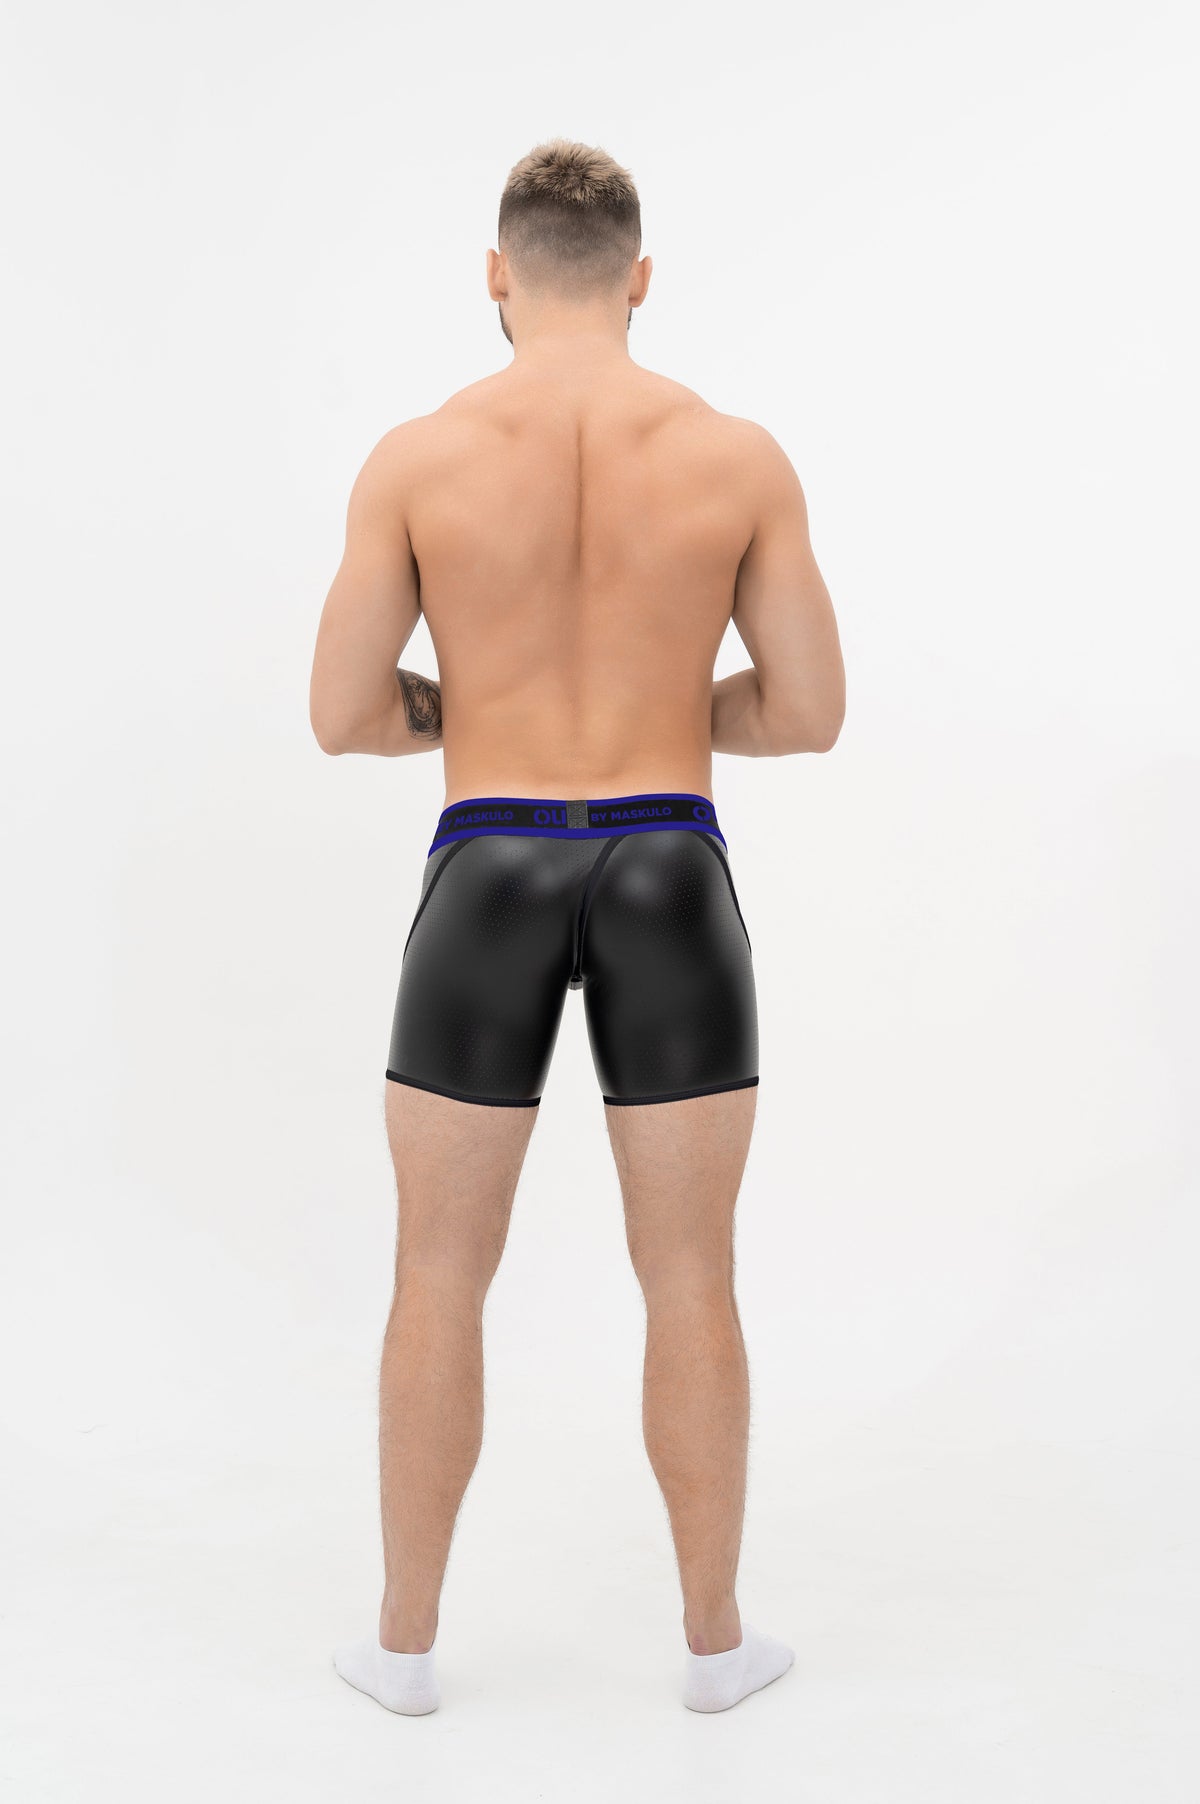 Outtox. Wrapped Rear Shorts with Snap Codpiece. Blue